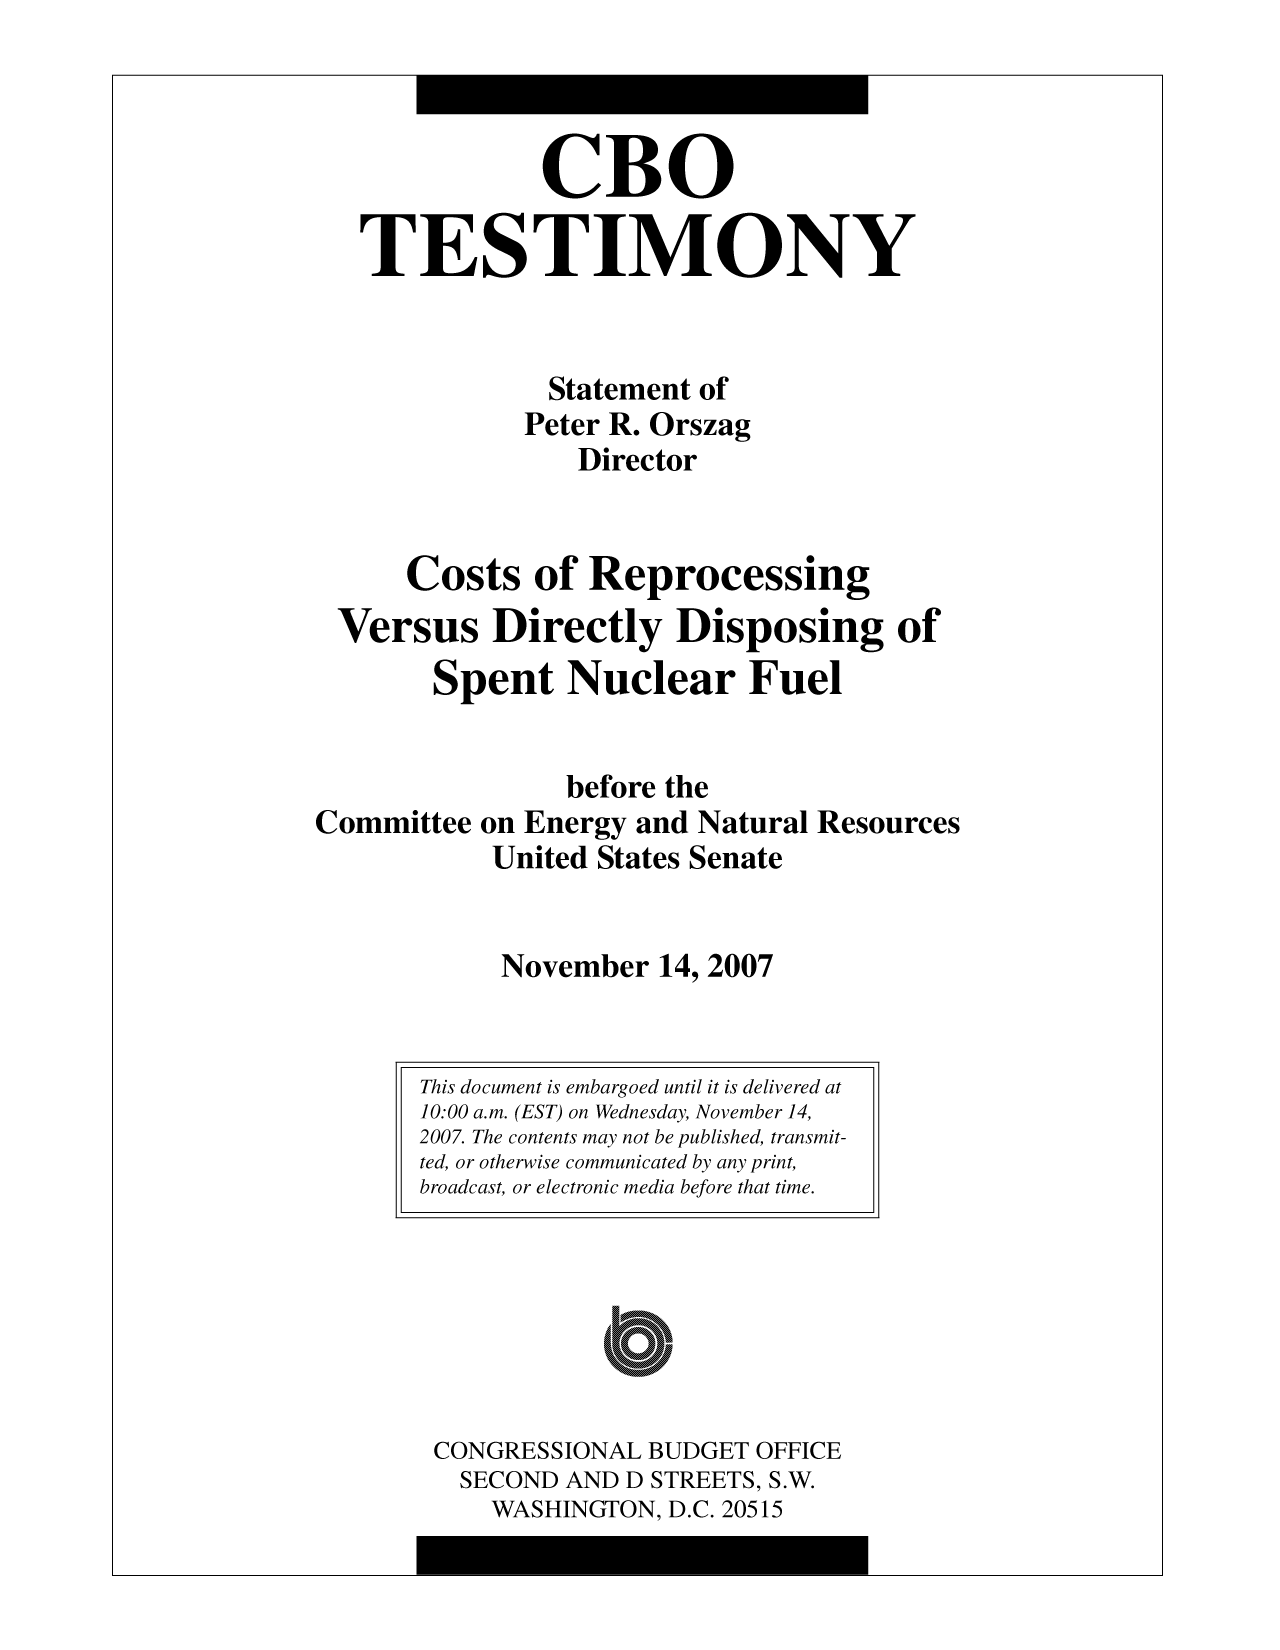 handle is hein.congrec/cbo10097 and id is 1 raw text is: CBO
TESTIMONY
Statement of
Peter R. Orszag
Director
Costs of Reprocessing
Versus Directly Disposing of
Spent Nuclear Fuel
before the
Committee on Energy and Natural Resources
United States Senate
November 14, 2007

CONGRESSIONAL BUDGET OFFICE
SECOND AND D STREETS, S.W.
WASHINGTON, D.C. 20515

This document is embargoed until it is delivered at
10:00 a.m. (EST) on Wednesday, November 14,
2007. The contents may not be published, transmit-
ted, or otherwise communicated by any print,
broadcast, or electronic media before that time.

I


